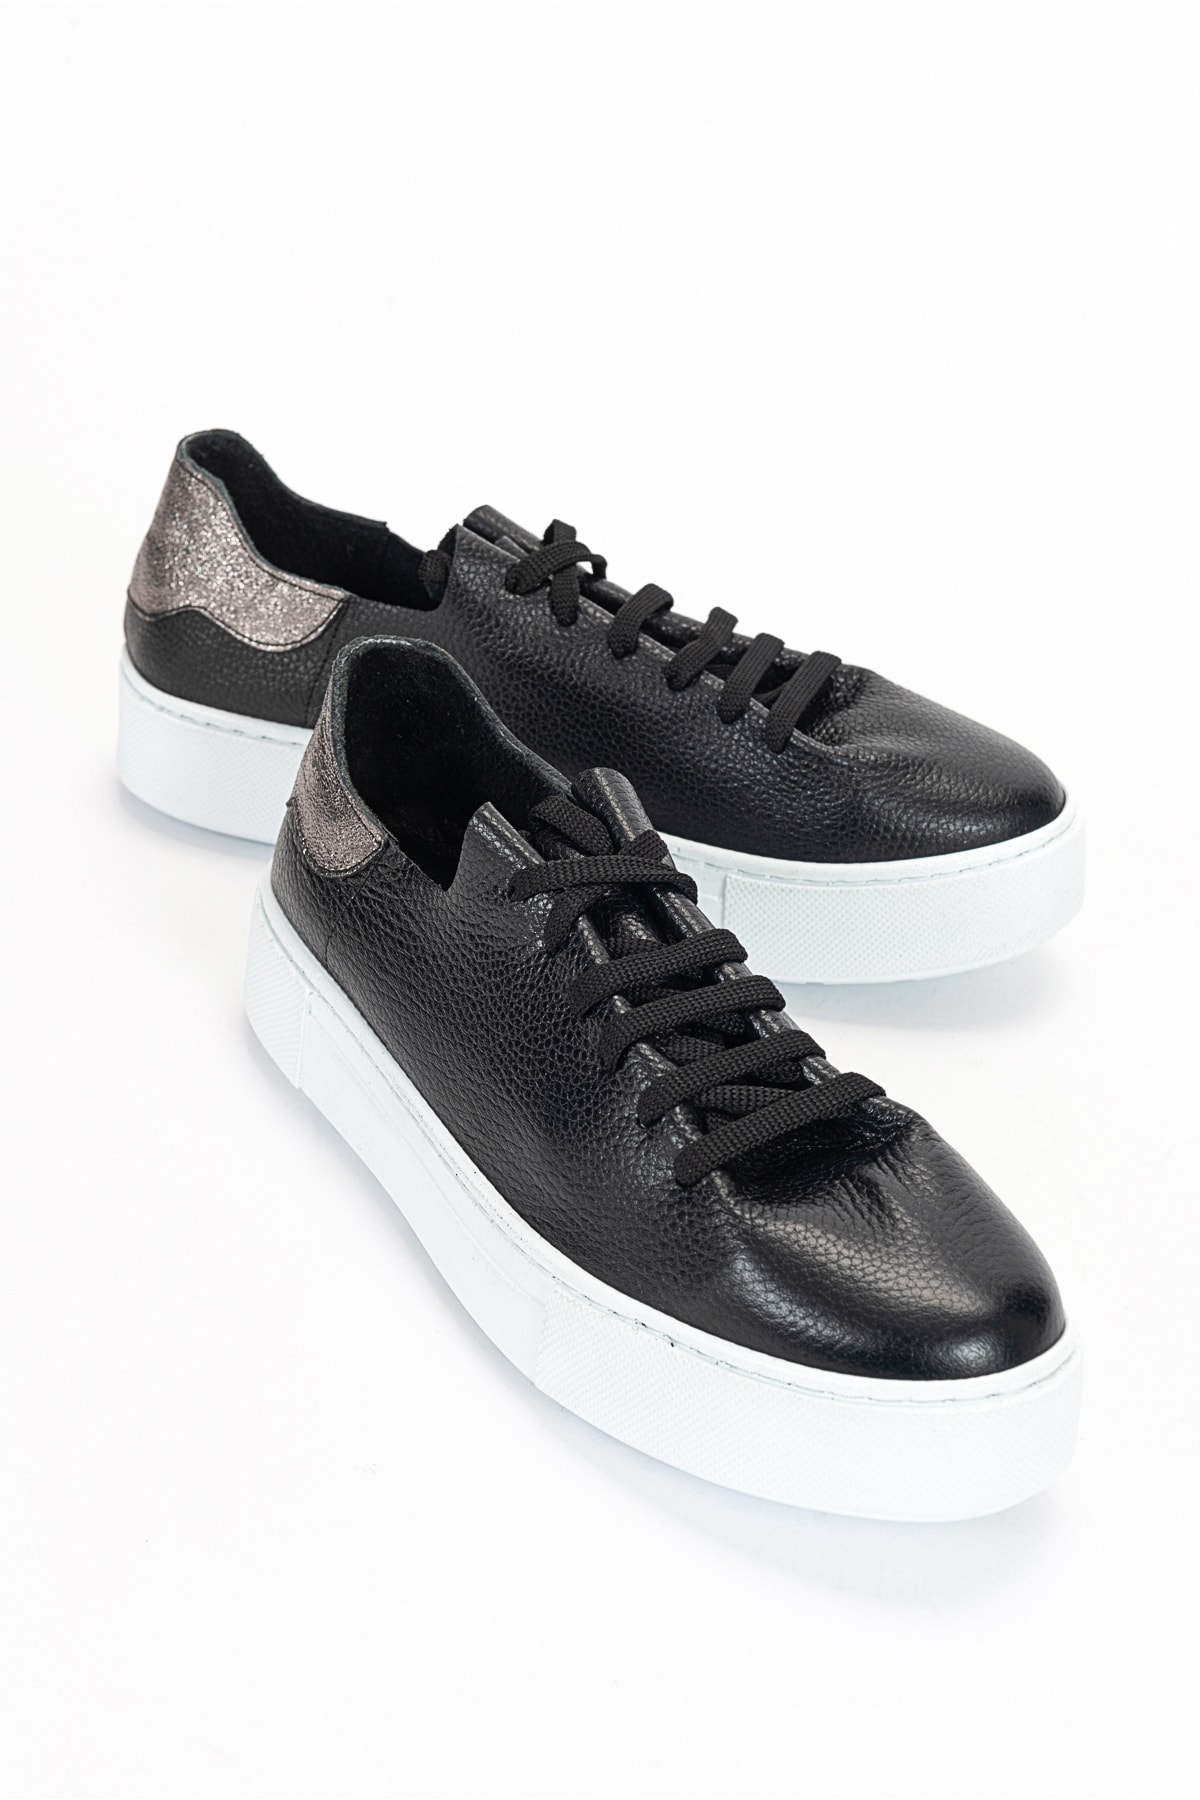 Levně LuviShoes 155 Women's Sneakers From Genuine Leather, Black Platinum.